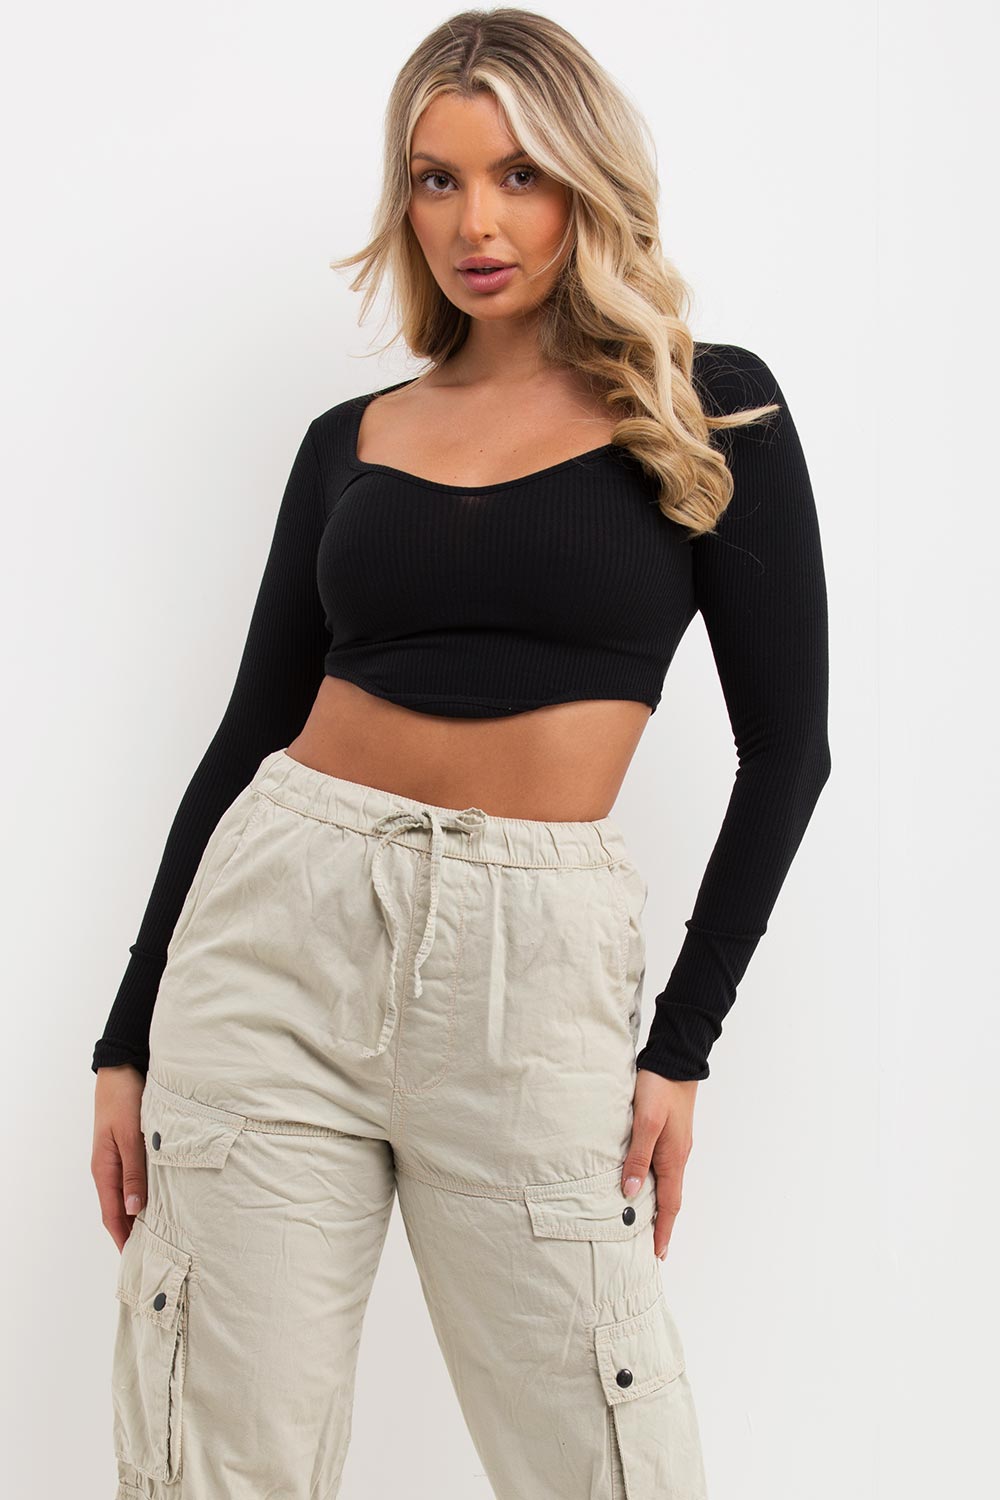 New Zara black crop top with ring detail, size Small